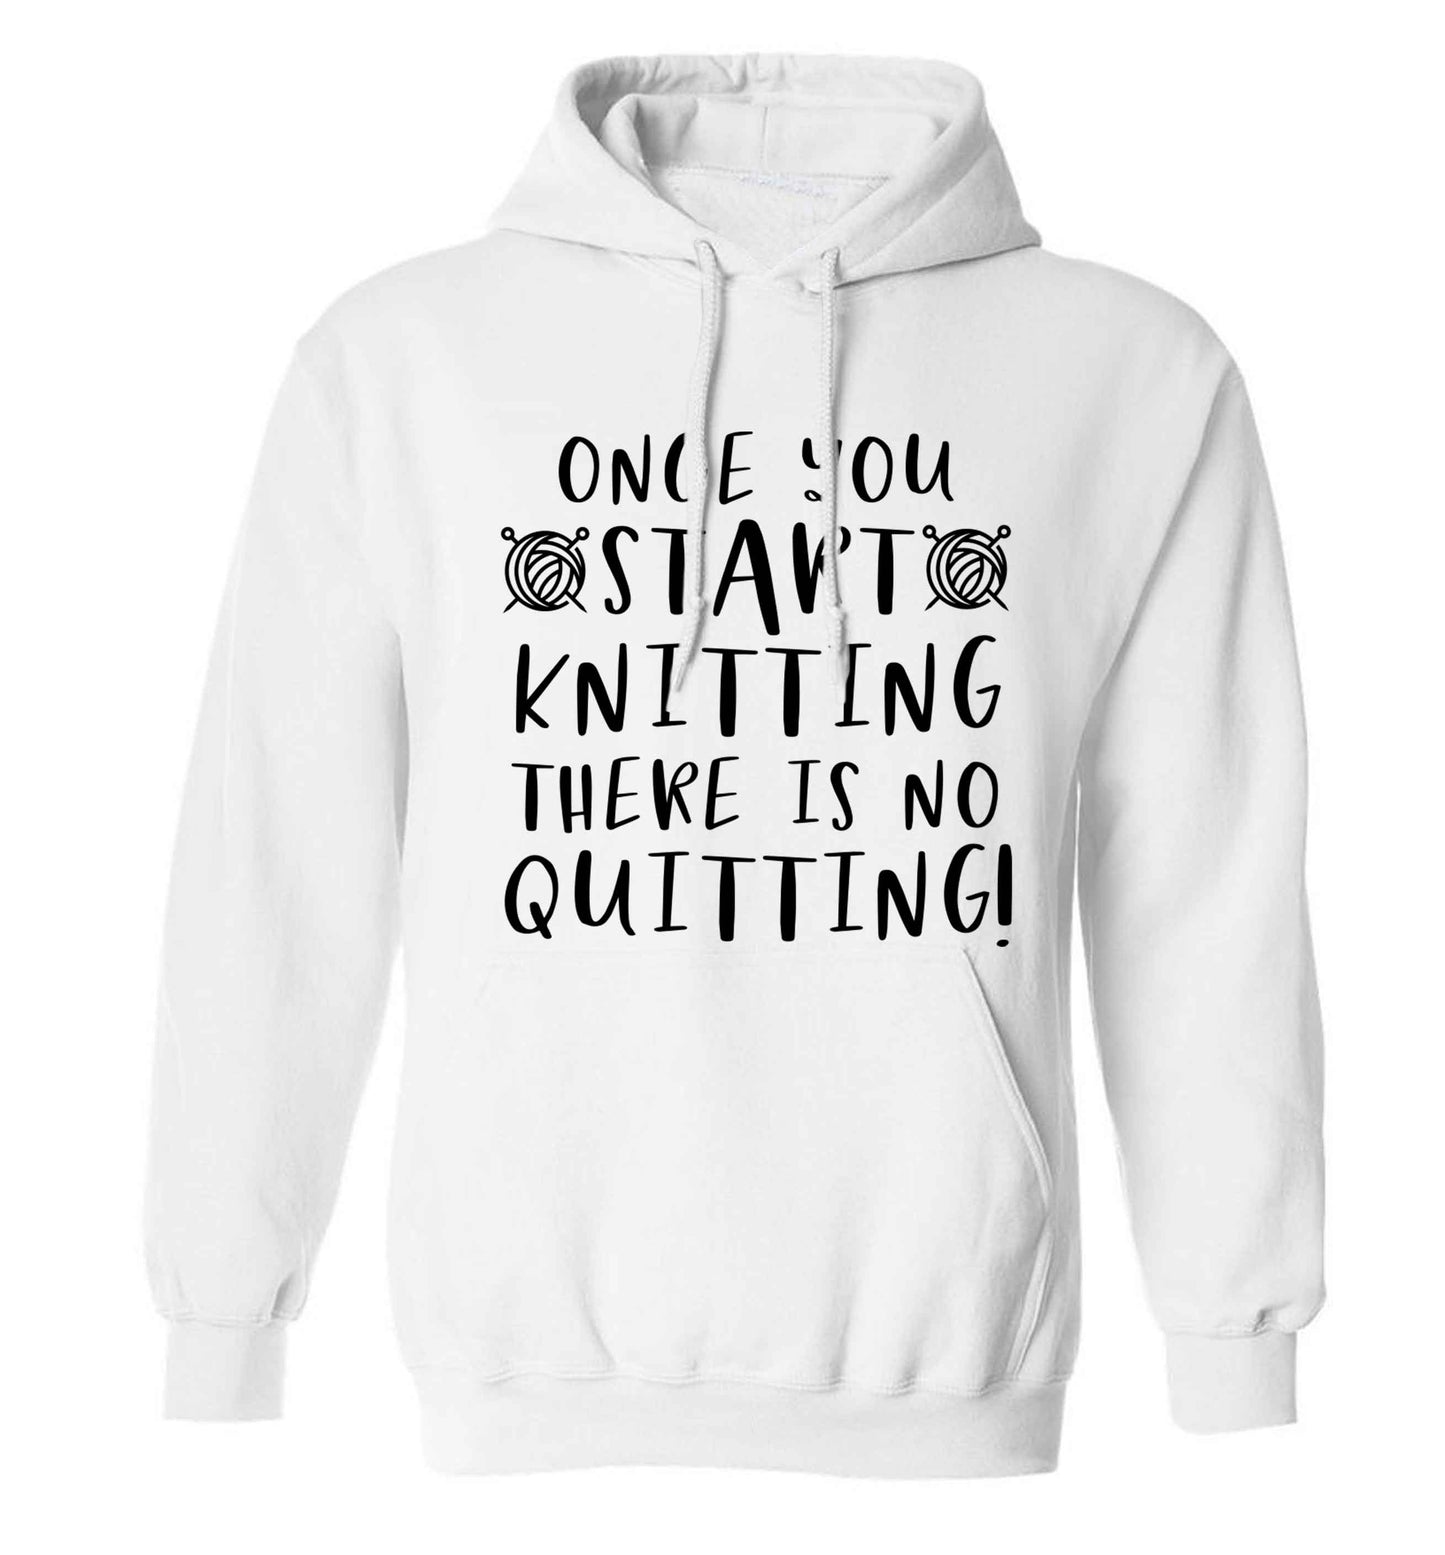 Once you start knitting there is no quitting! adults unisex white hoodie 2XL